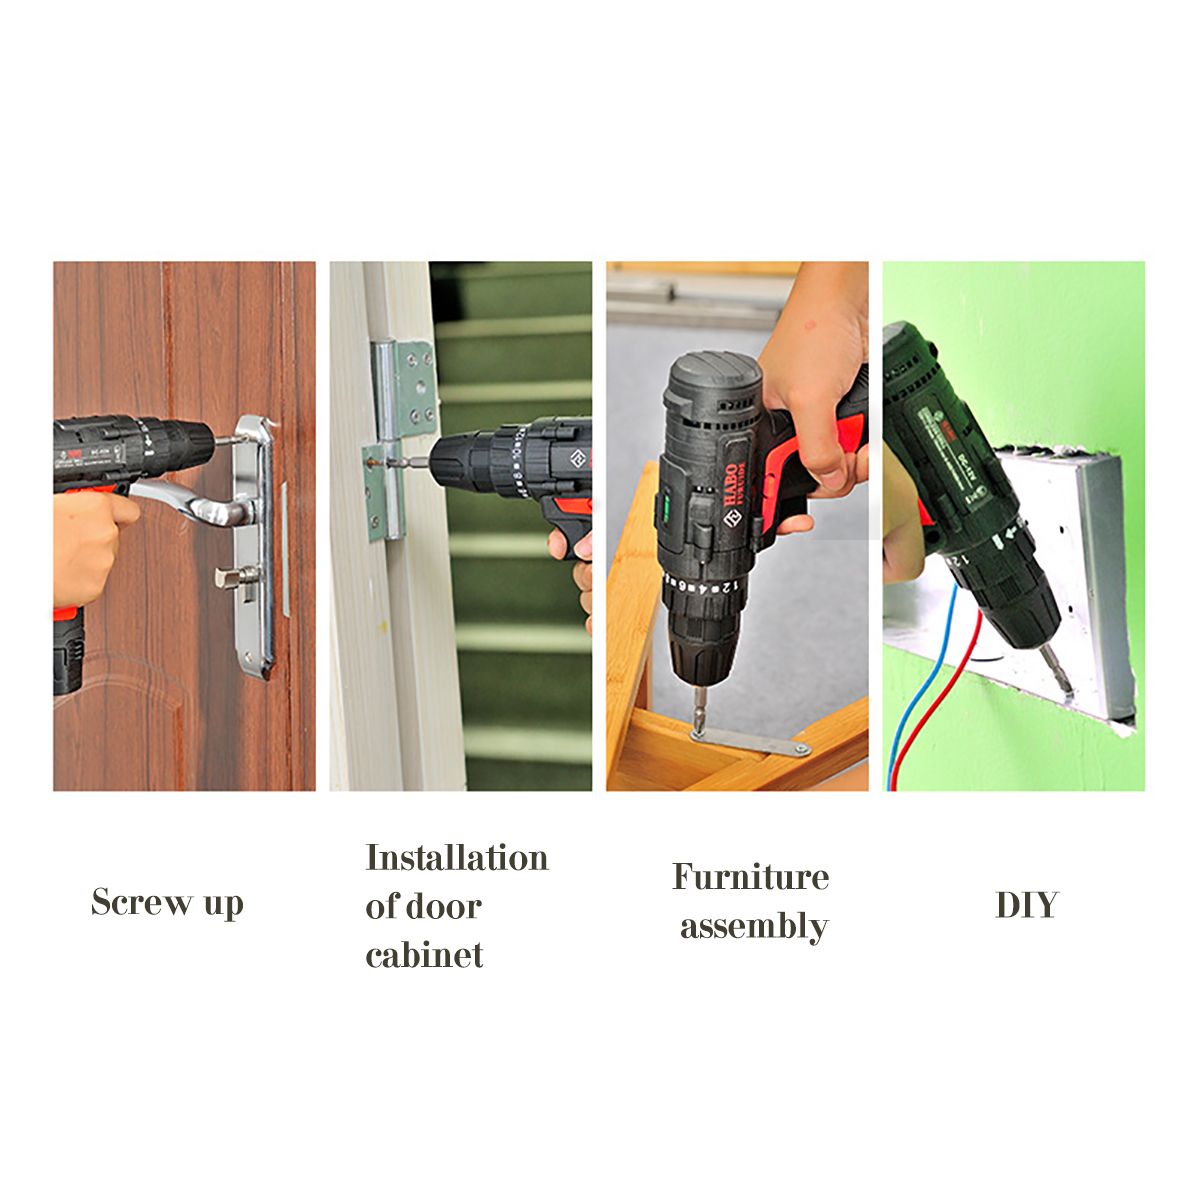 25-V-Drill-2-Speed-Electric-Cordless-Drill-Driver-with-Bits-Set-Batteries-1757270